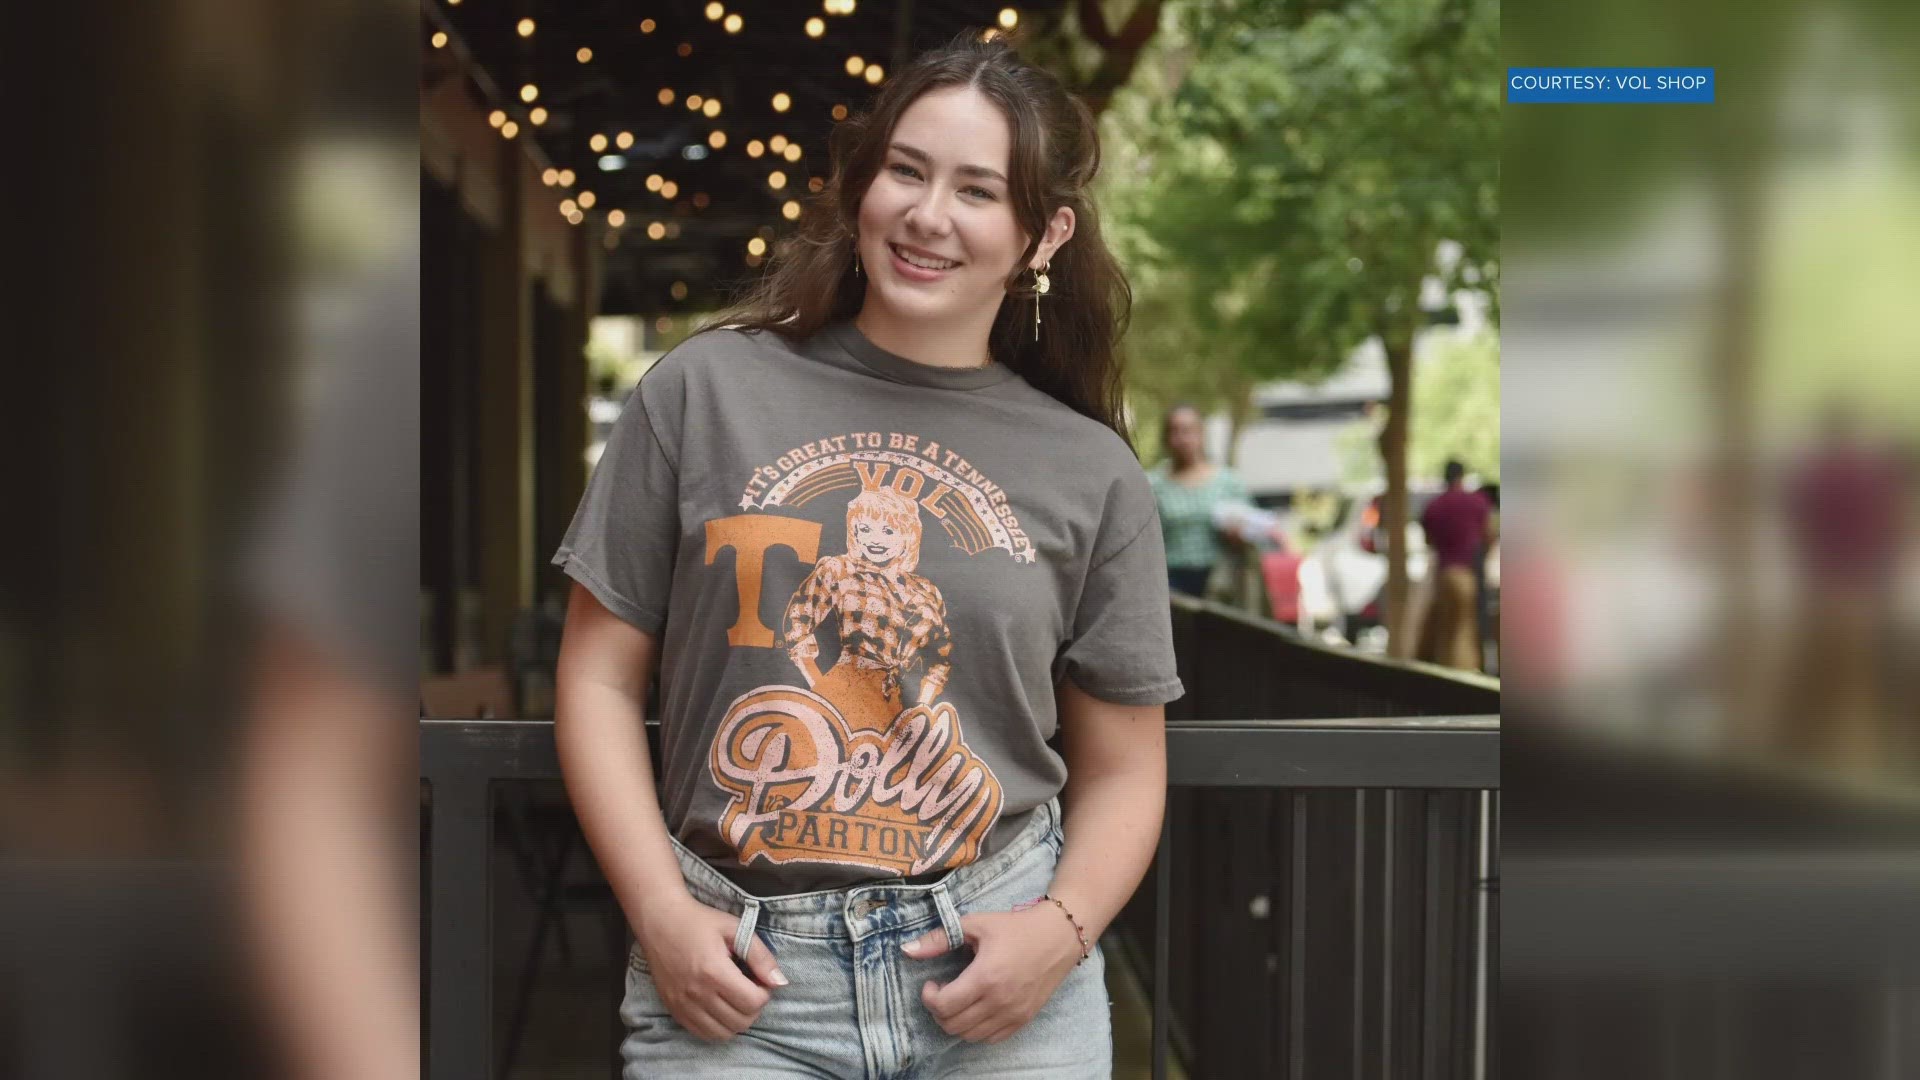 Dolly Parton has a new clothing collection with the Vols. You can expect some of her trademark butterflies and retro lettering, all fitting for Dolly!